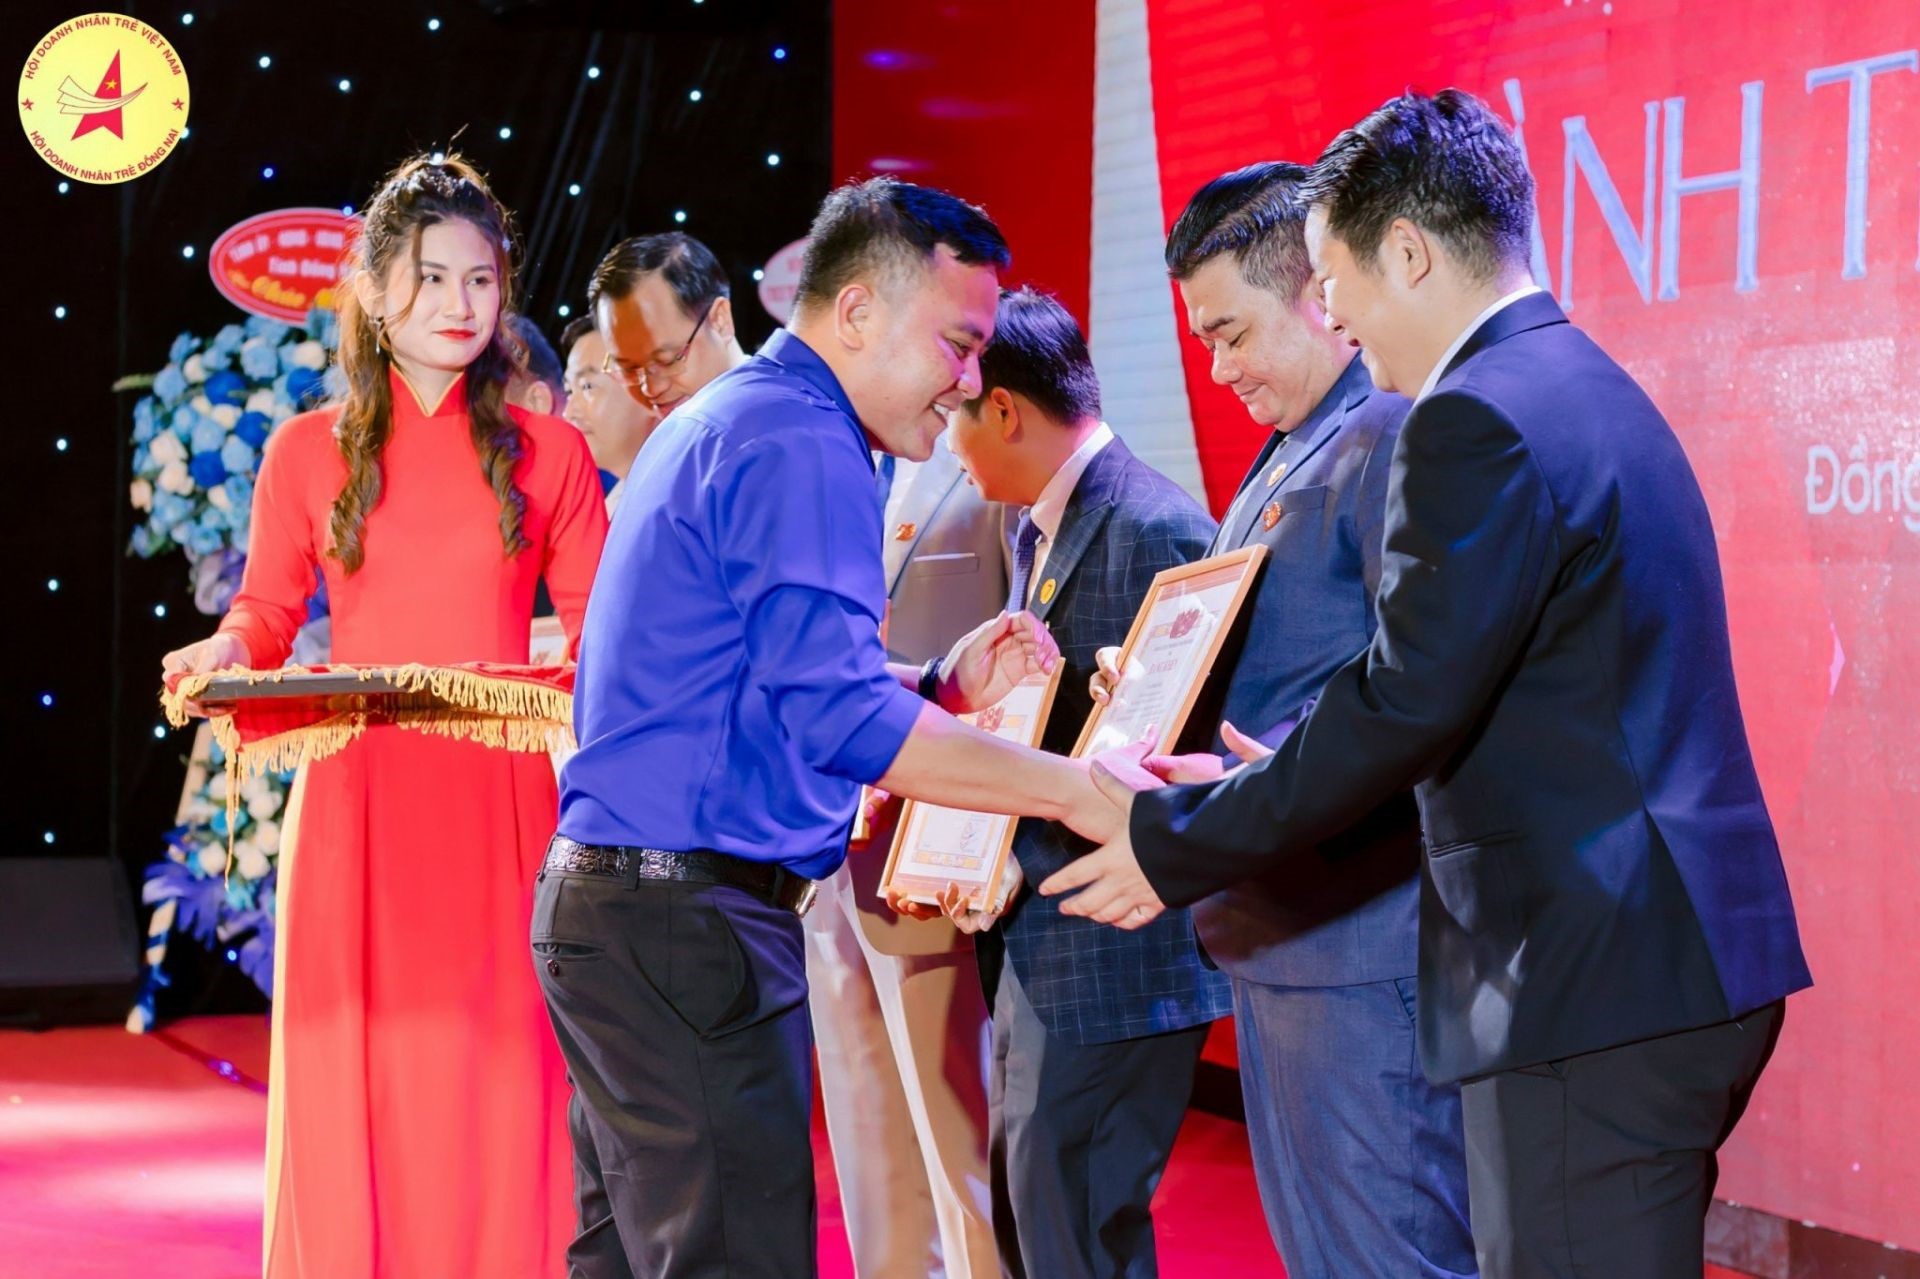 CEO Nguyen Duy Khuong was honoured to receive the Certificate of Merit from the Committee of Vietnam Youth Union of Dong Nai Province.